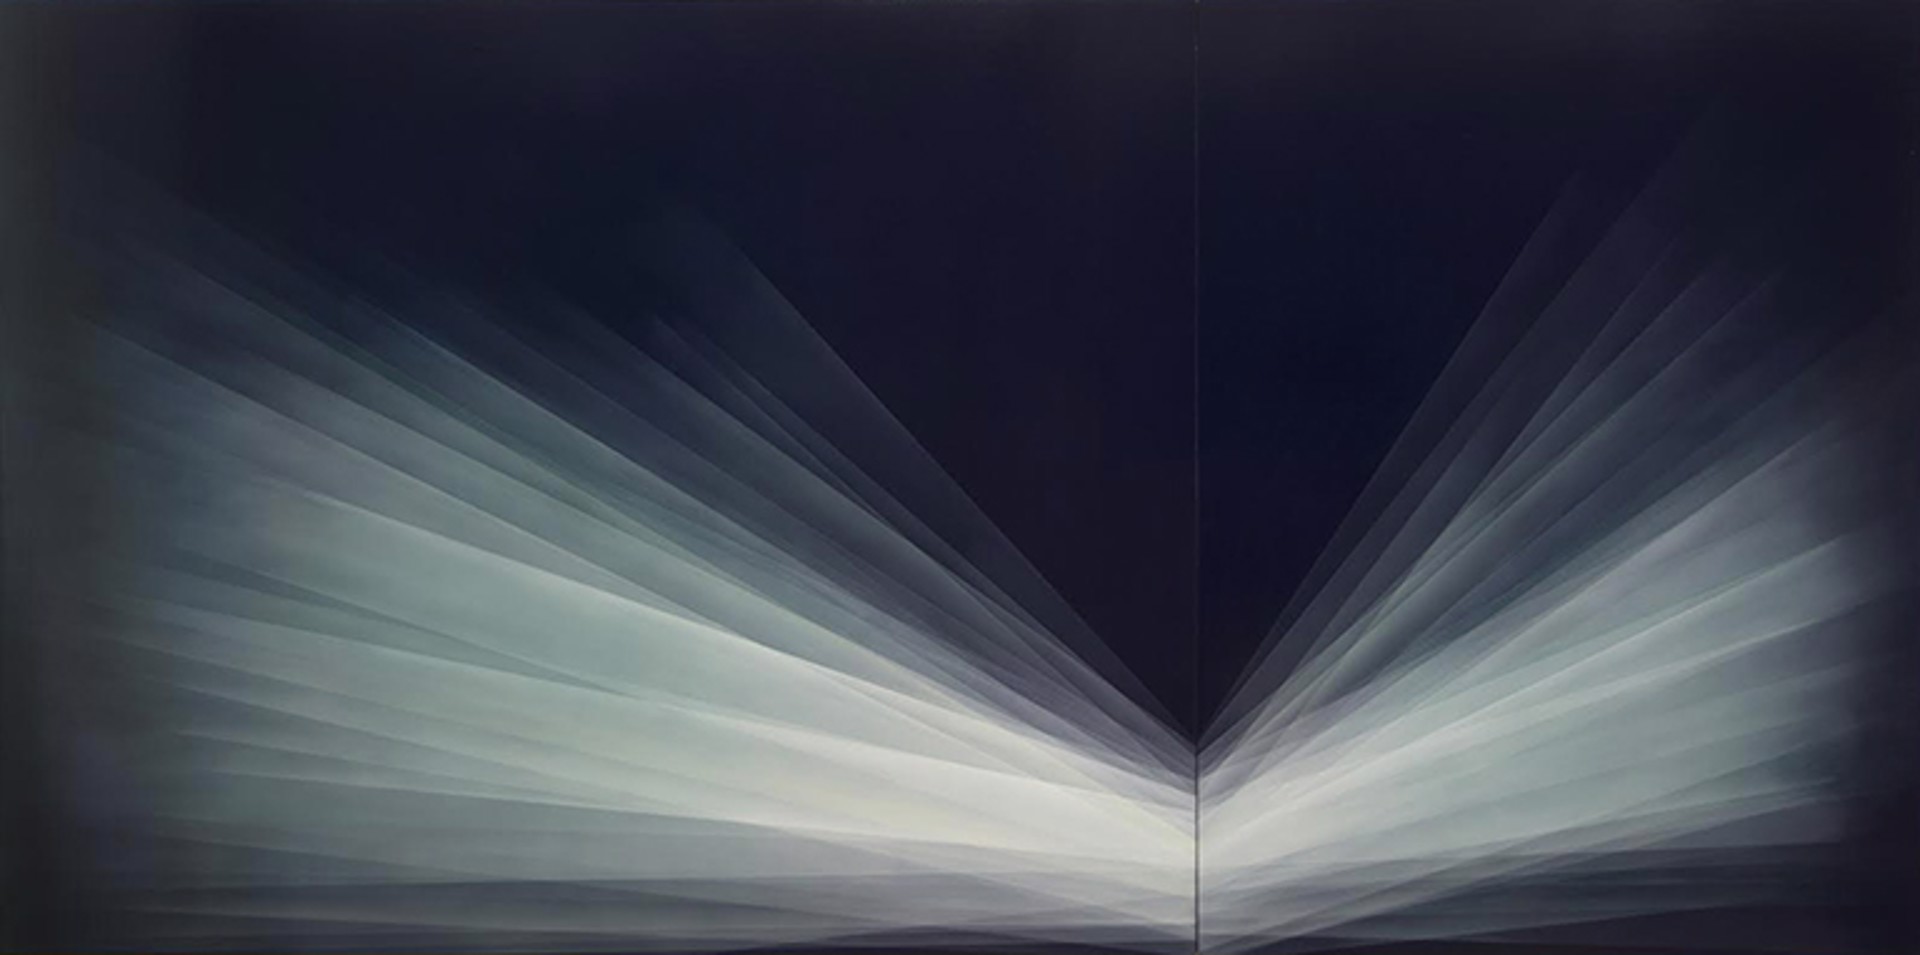 Refraction Diptych (Midnight Blue- Turquoise) by Bernadette Jiyong Frank